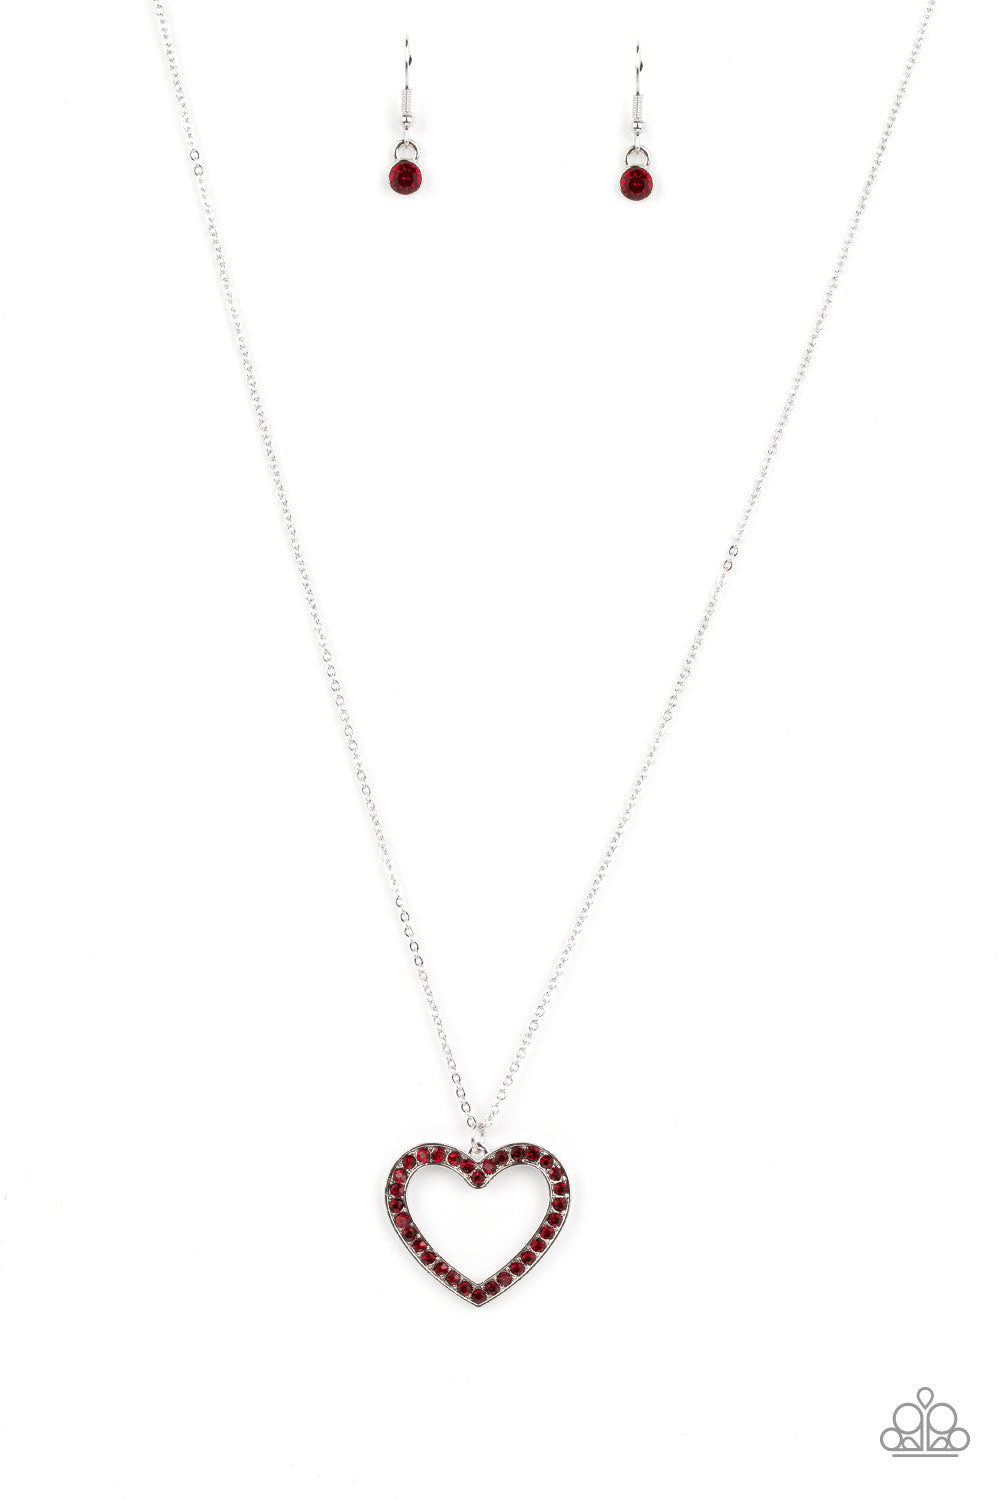 Dainty Darling - Red (Heart) Necklace